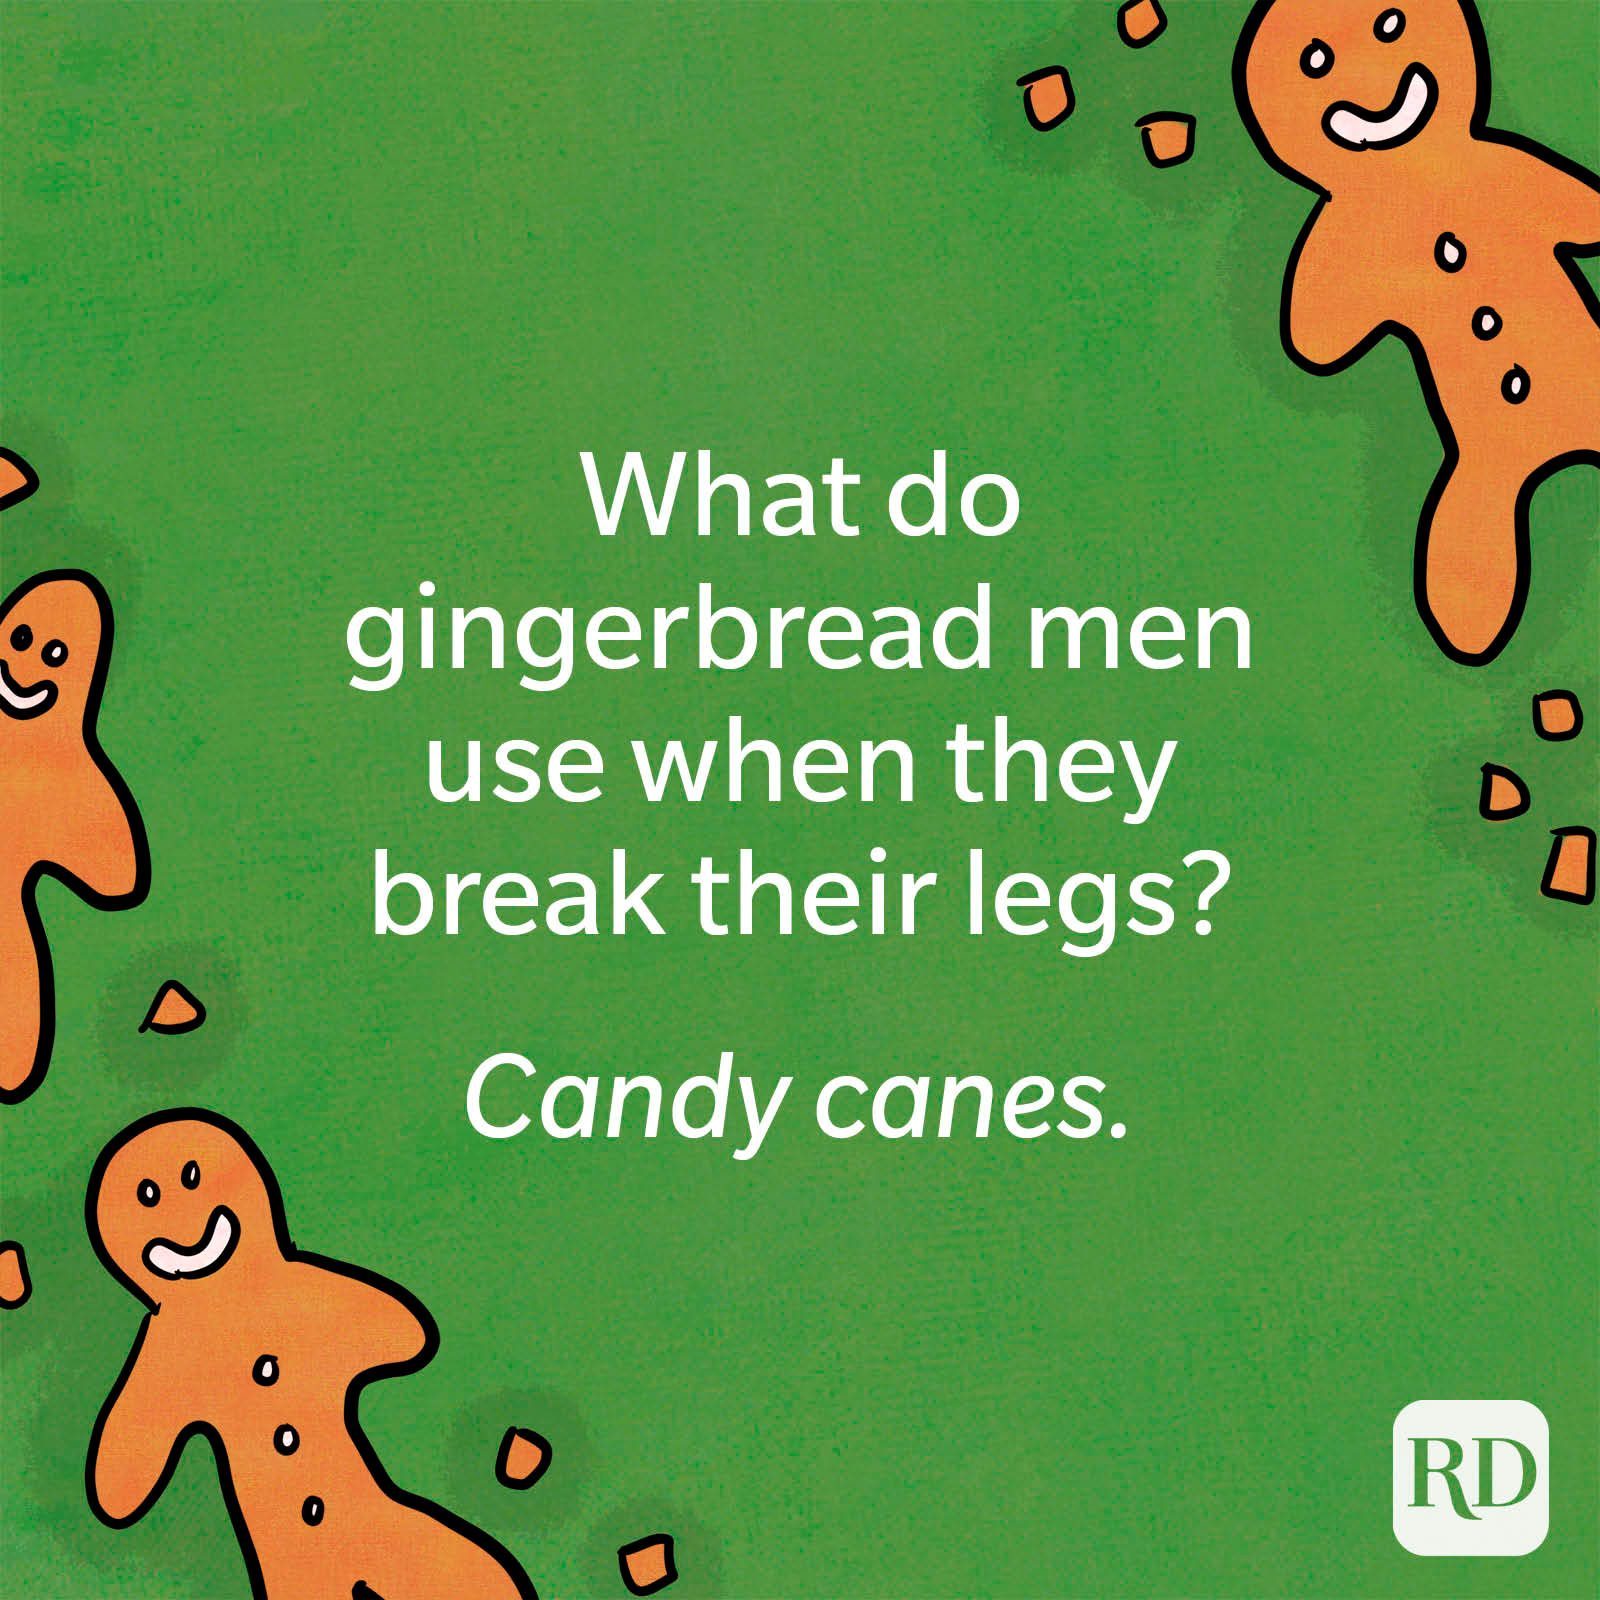 What do gingerbread men use when they break their legs? Candy canes.